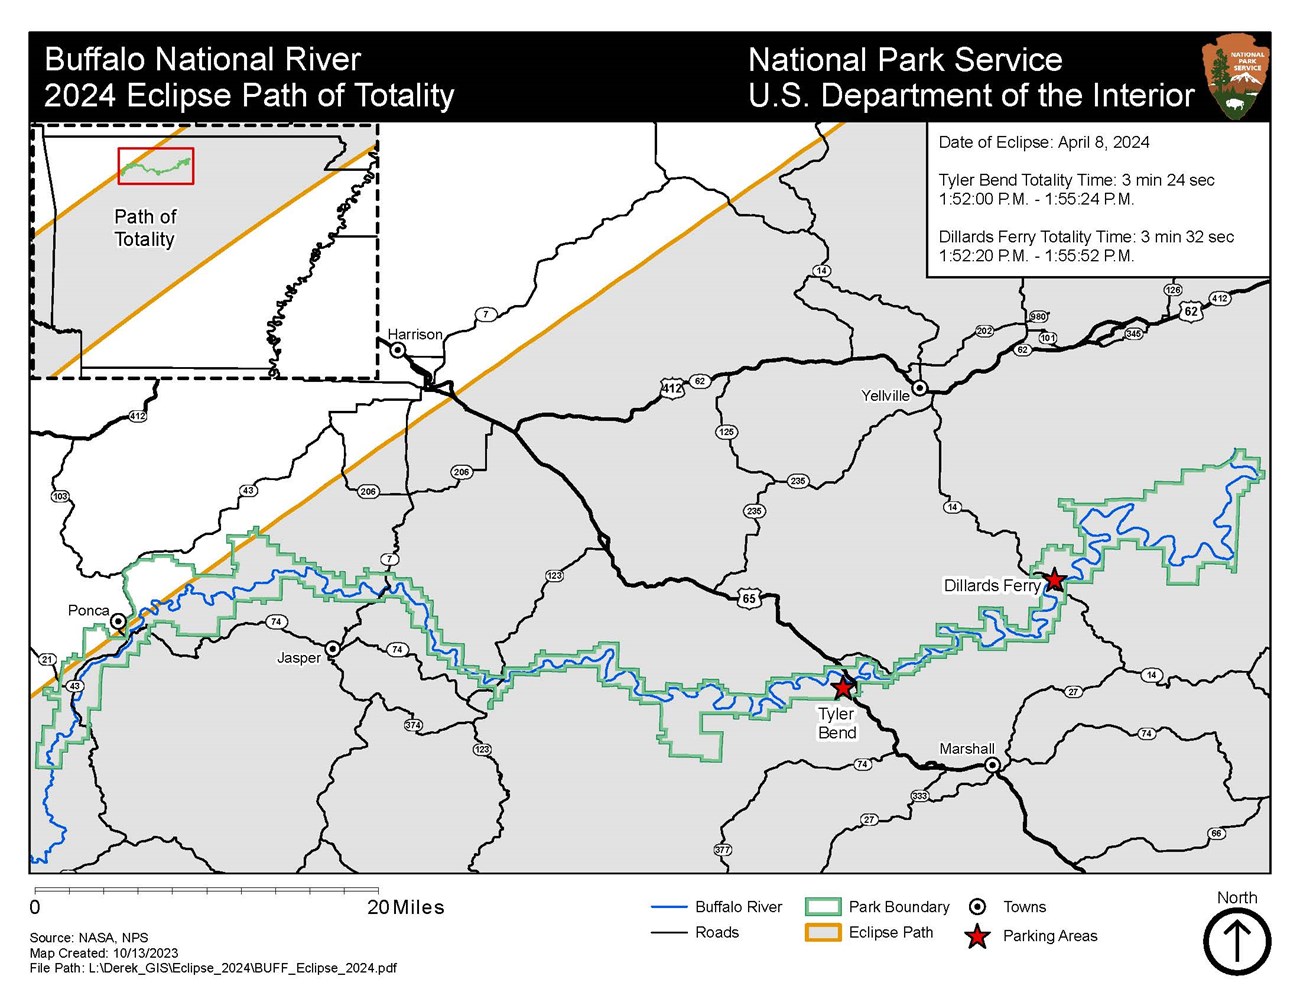 A map depicting the path of totality, shaded in gray, over Buffalo National River in relation to the river outlined in blue and the park boundary outlined in green. Two red stars identify the best parking areas in the park.